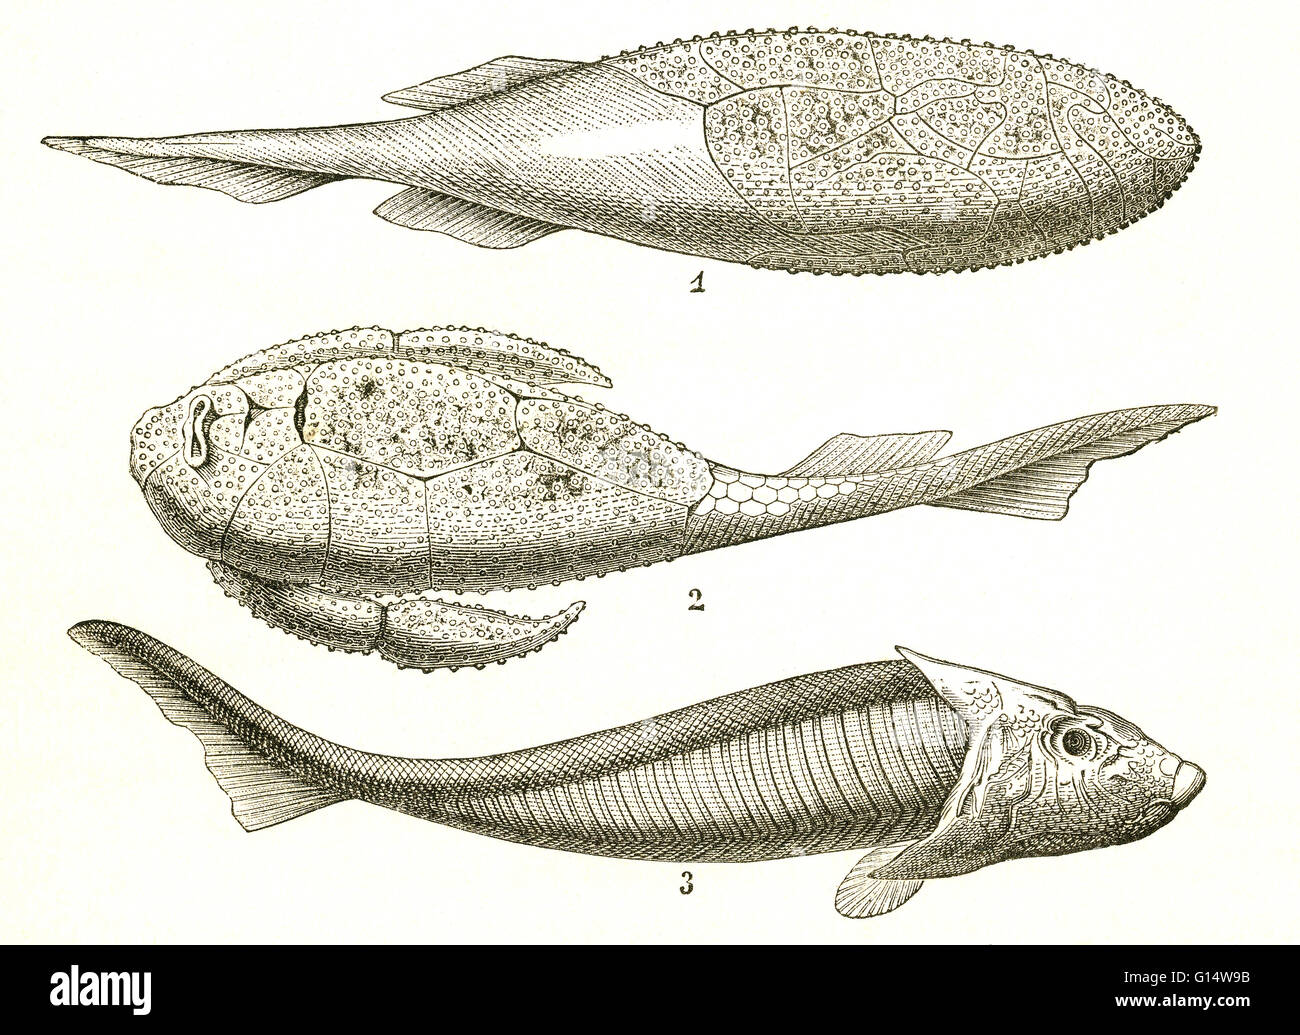 Three kinds of armored fish from the Devonian Period, including Coccosteus (1), Pterichthys (2) and Cephalaspis (3).  Illustration from Louis Figuier's The World Before the Deluge, 1867 American edition. Stock Photo